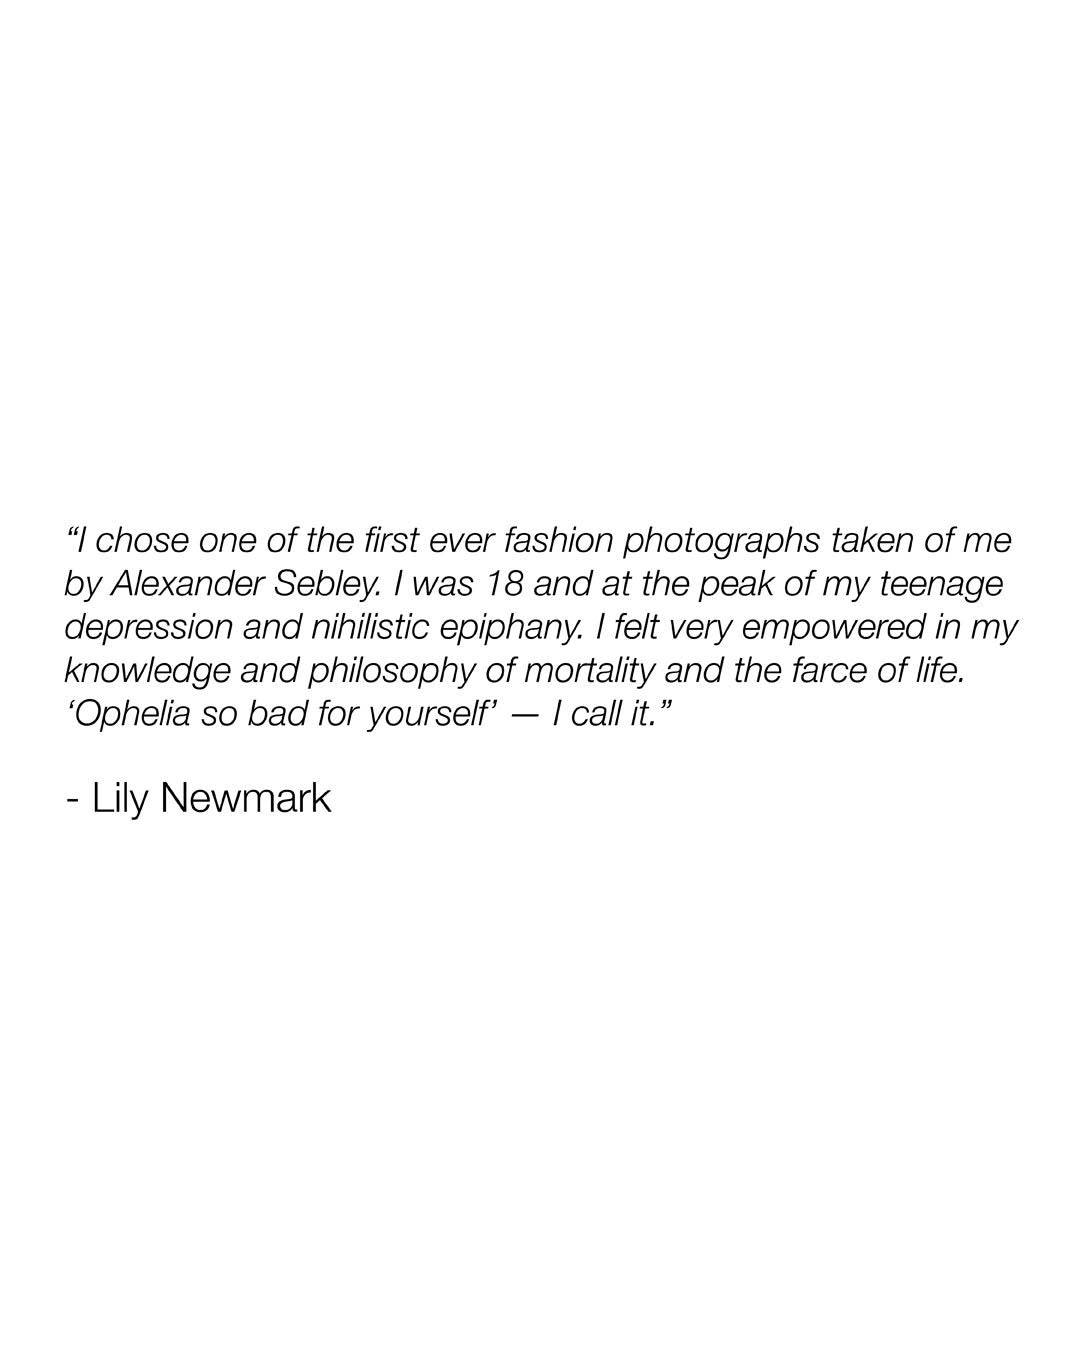 Lily Newmark